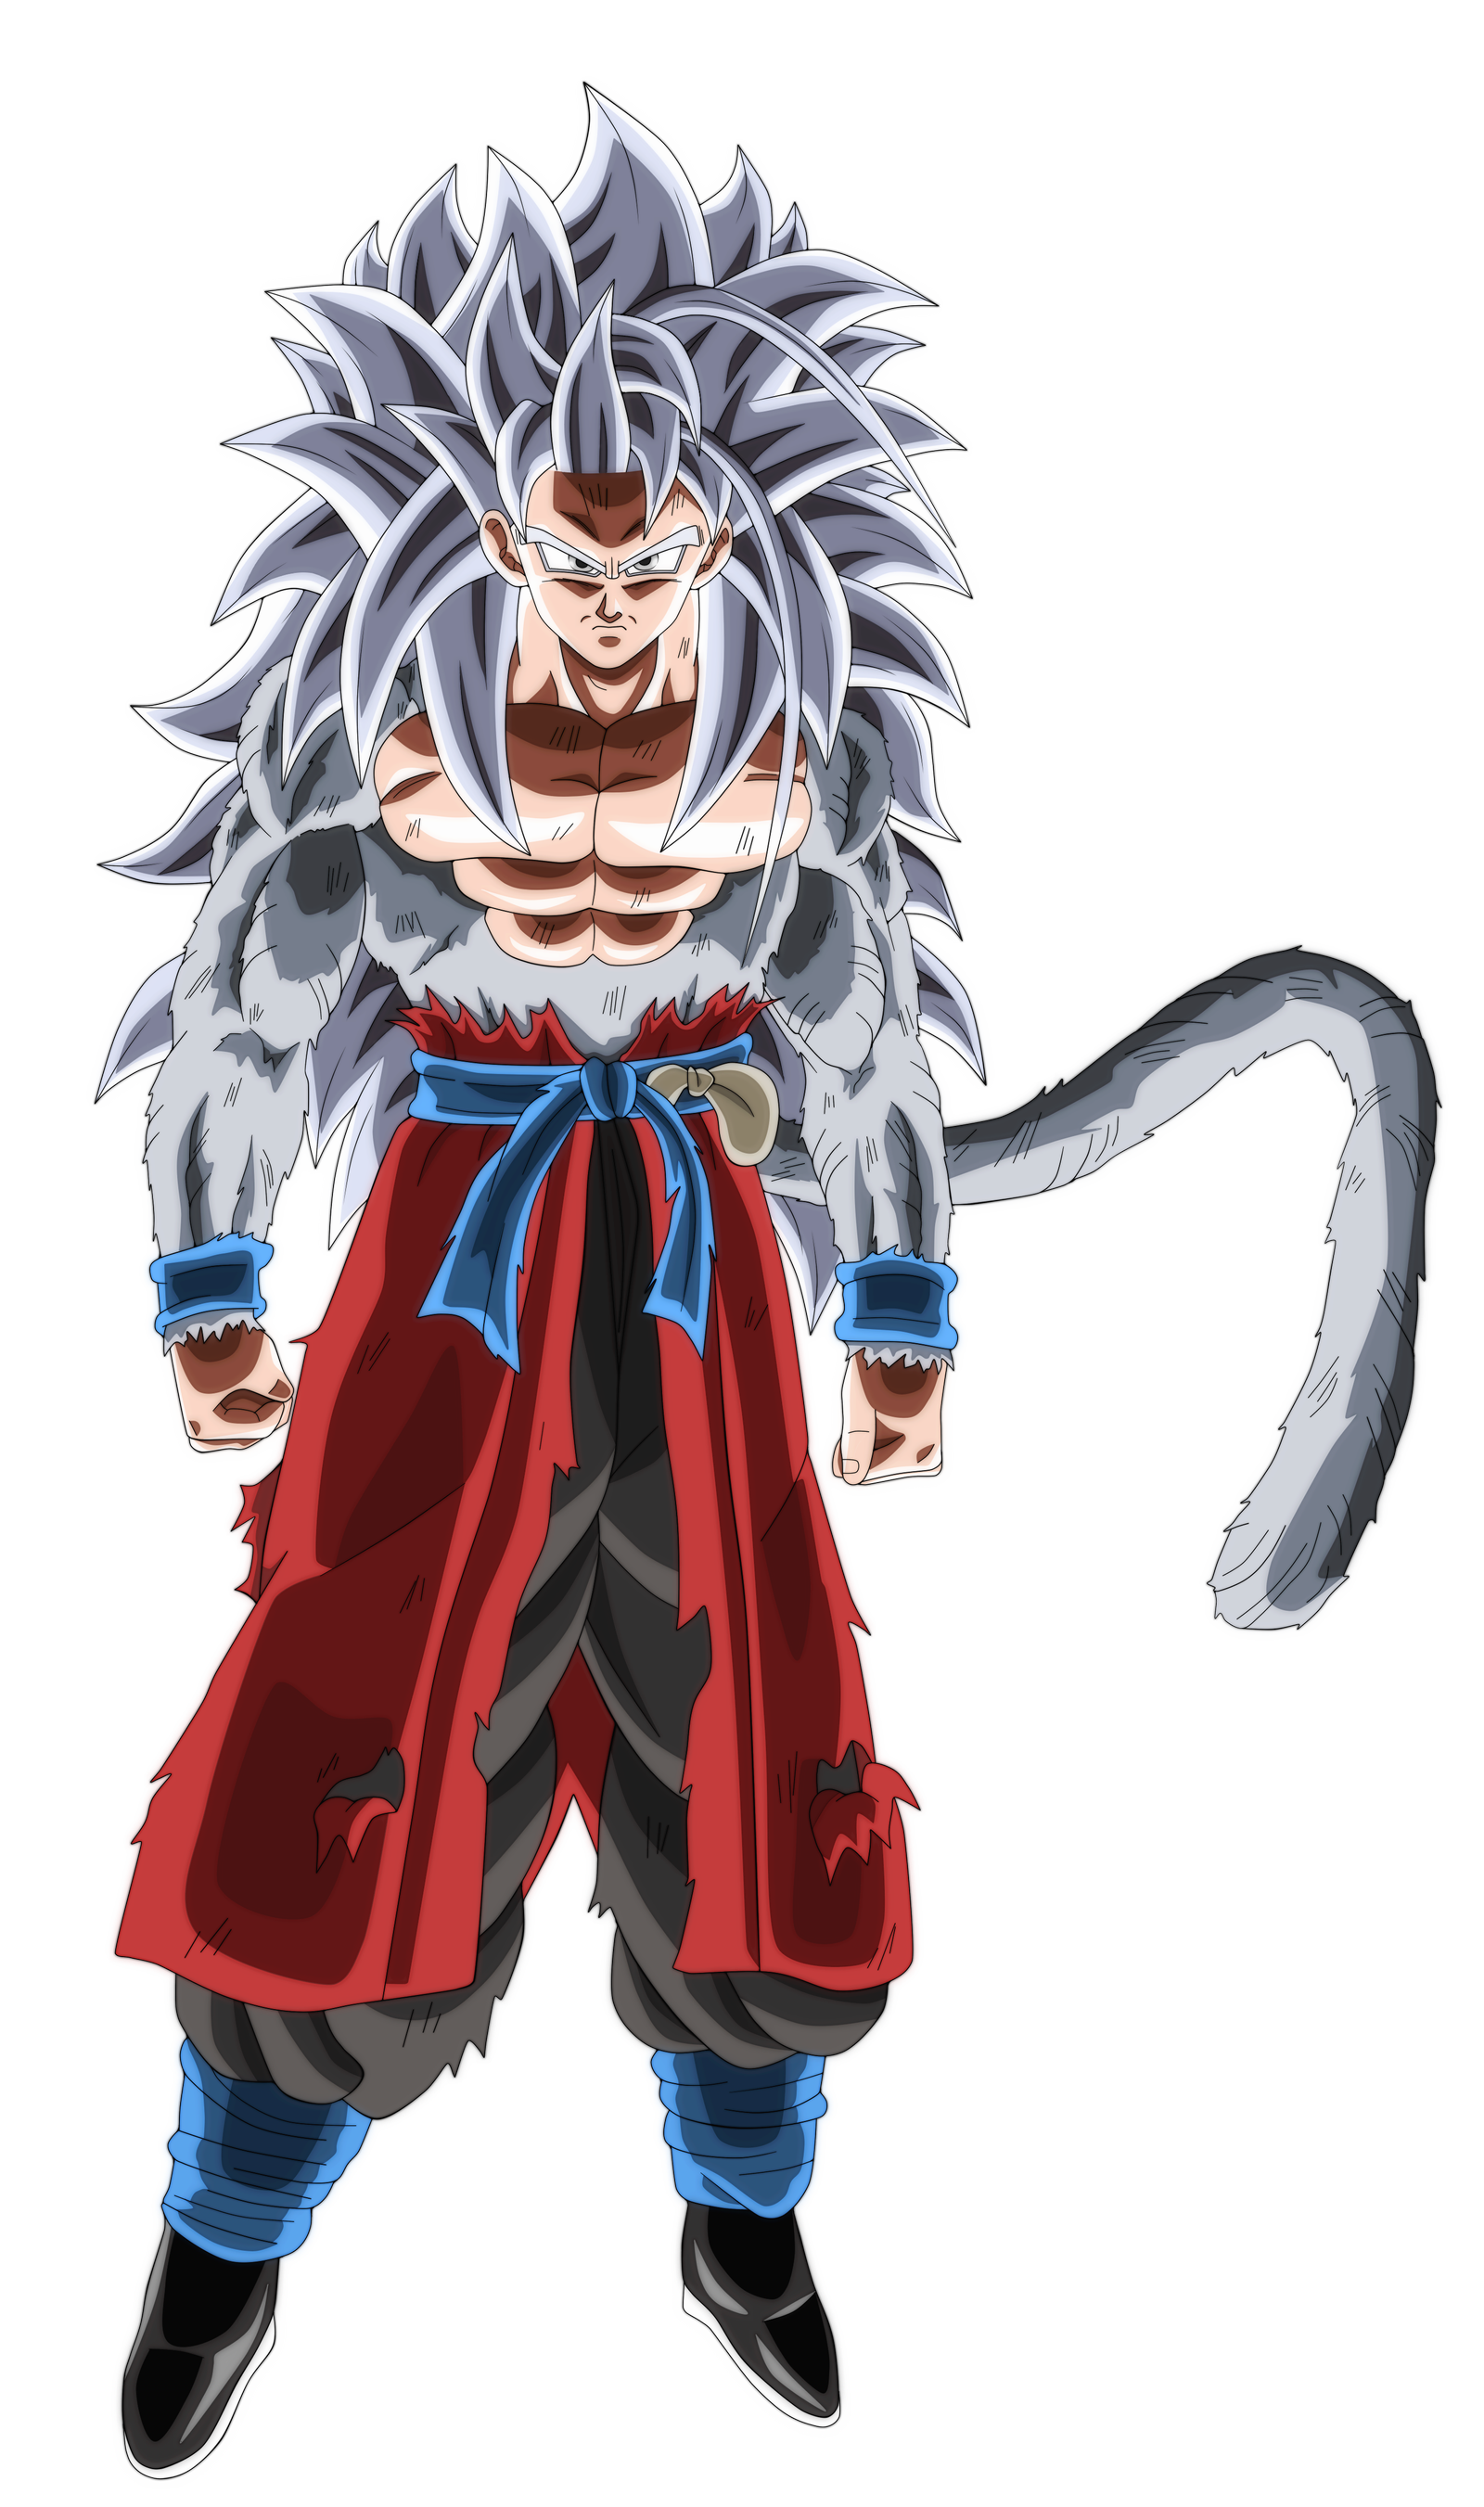 What is Omni Super Saiyan, and what is its power? - Quora